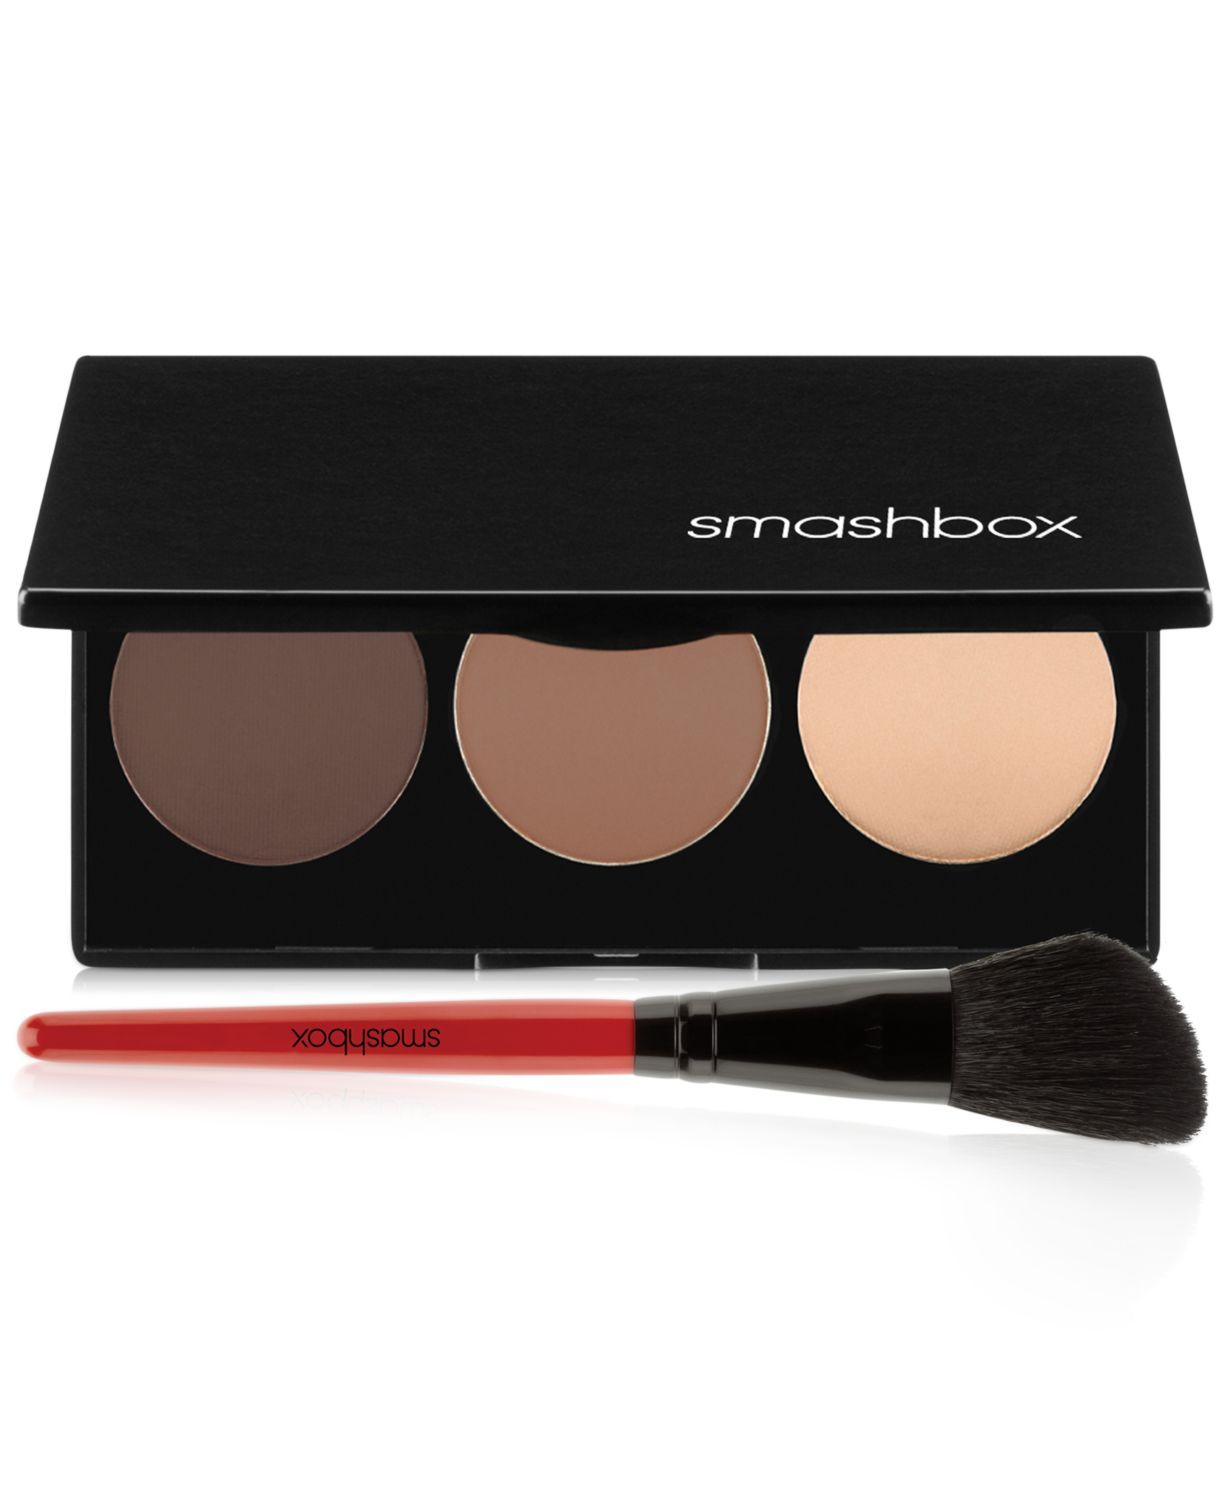 the best contour kits for instant cheekbones no matter your skill level